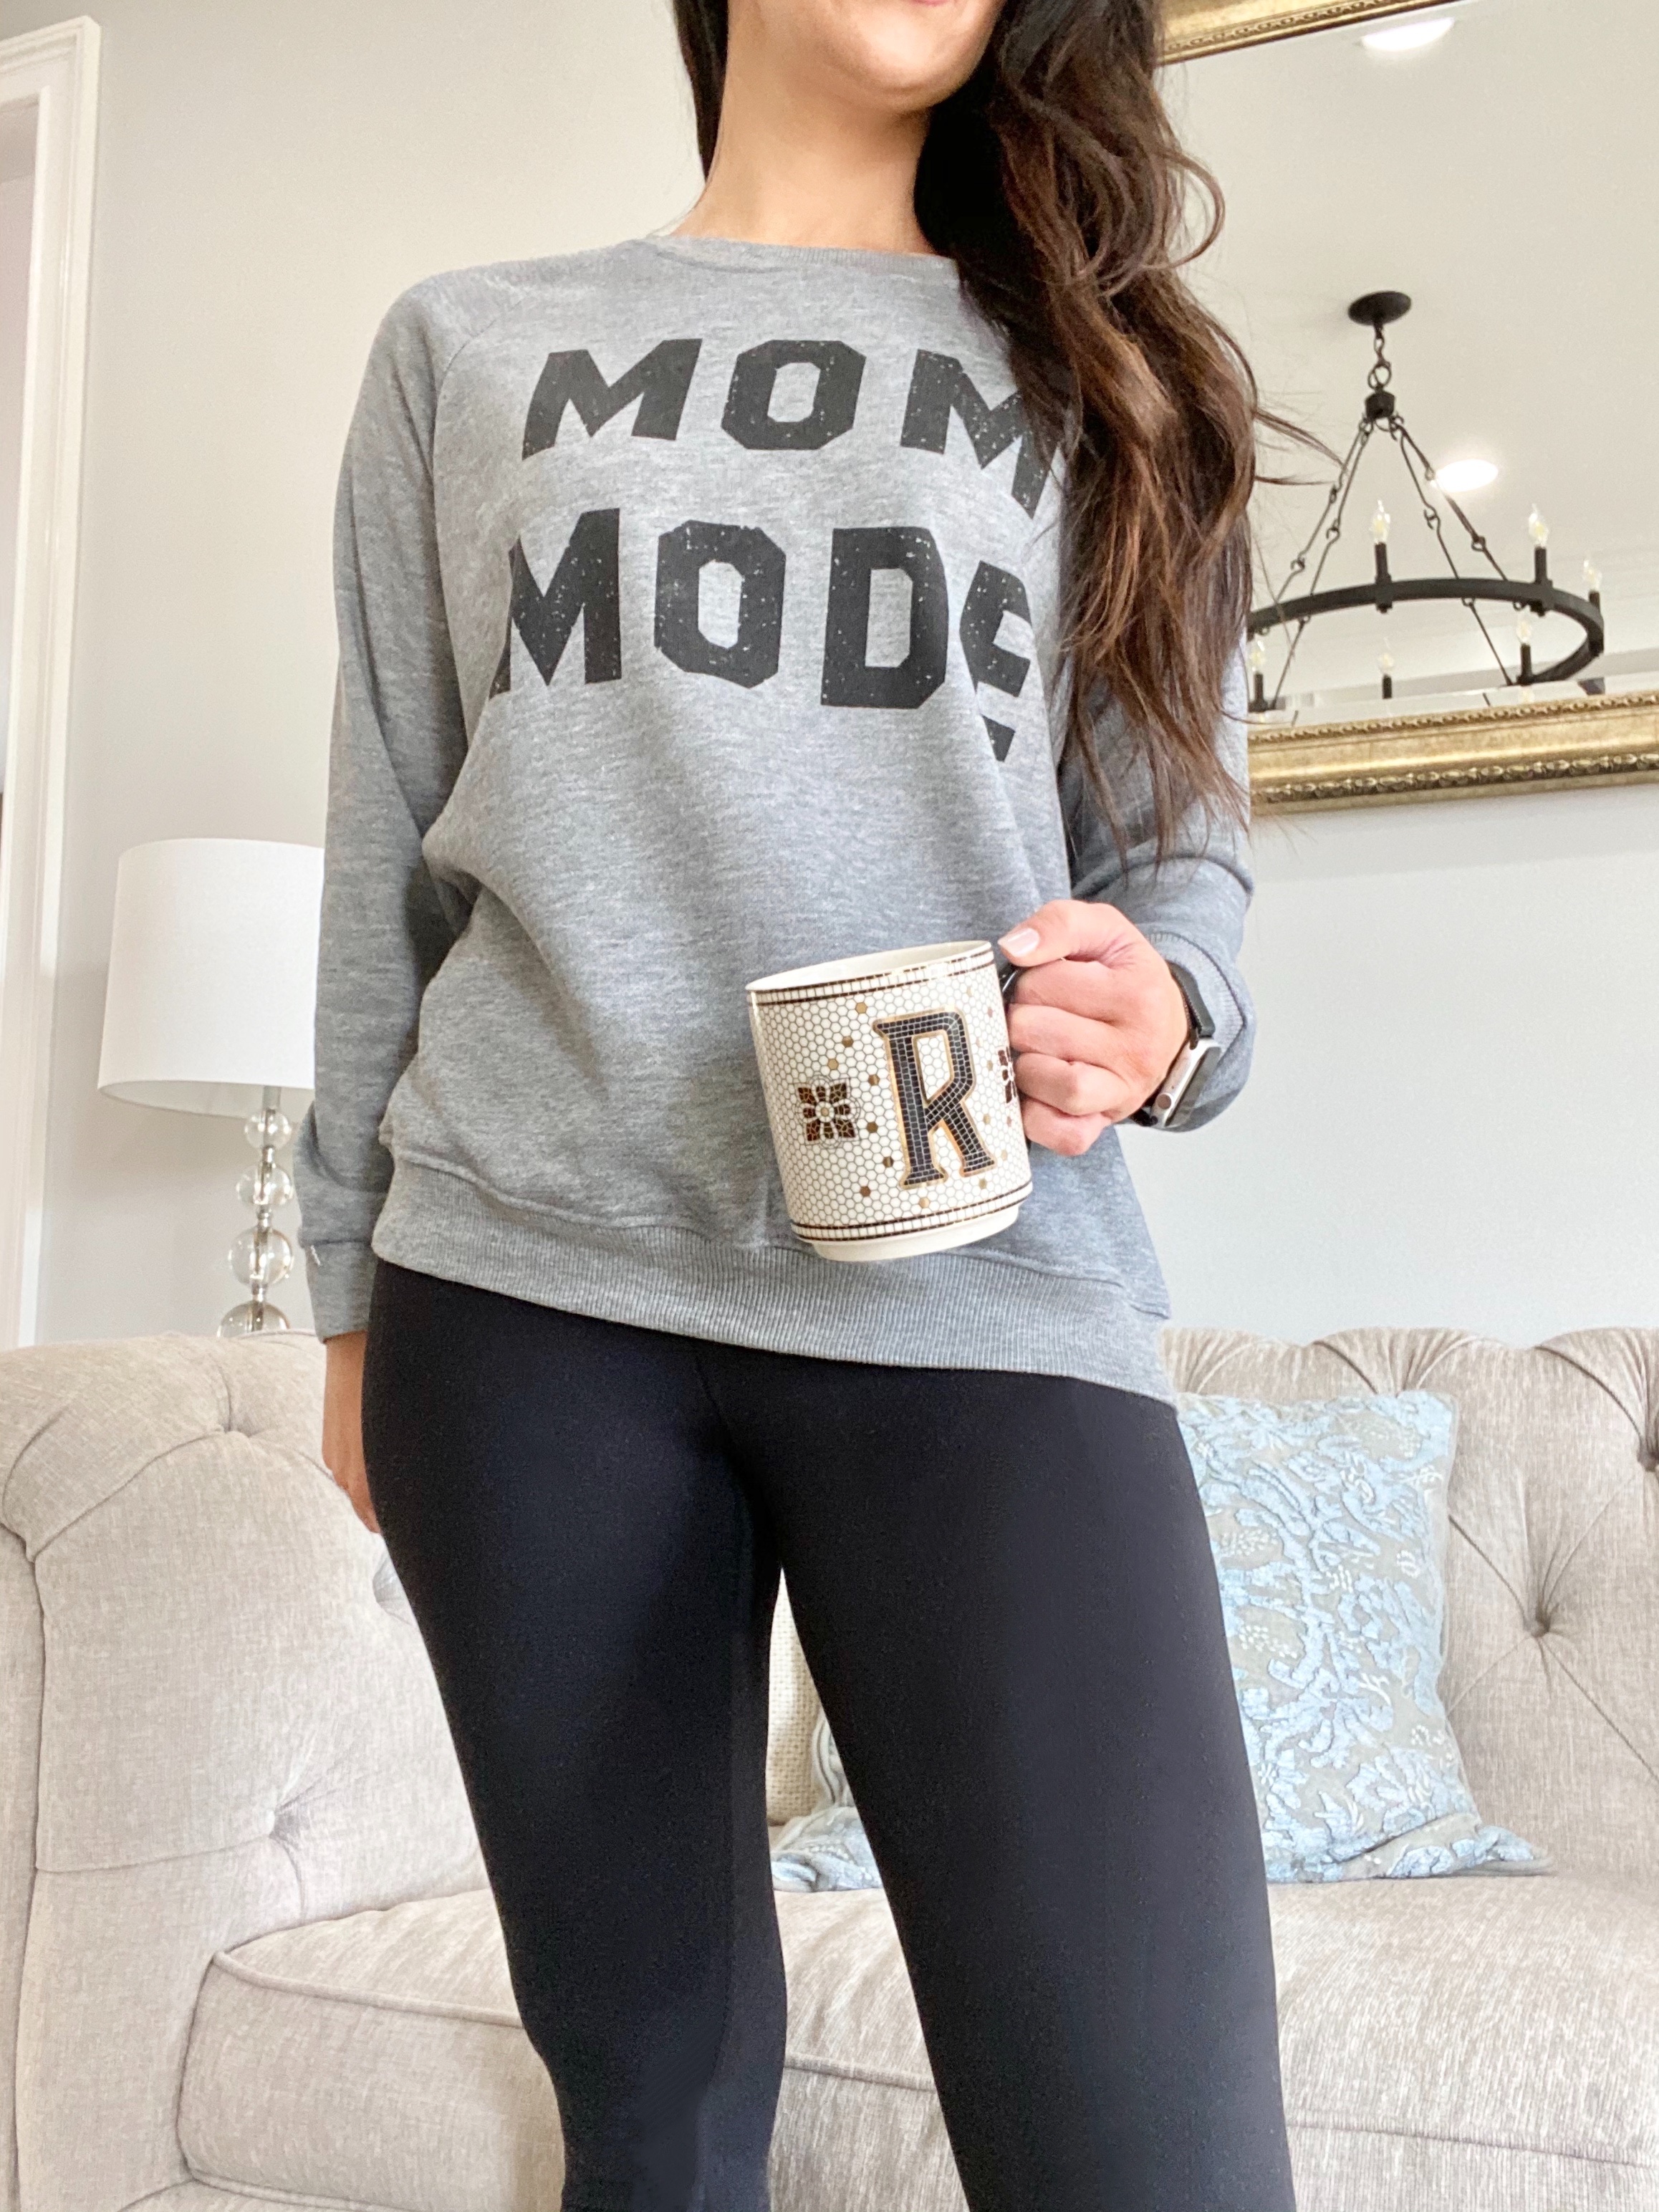 Basic Wardrobe For The Stay At Home Mom - Momma Mandy